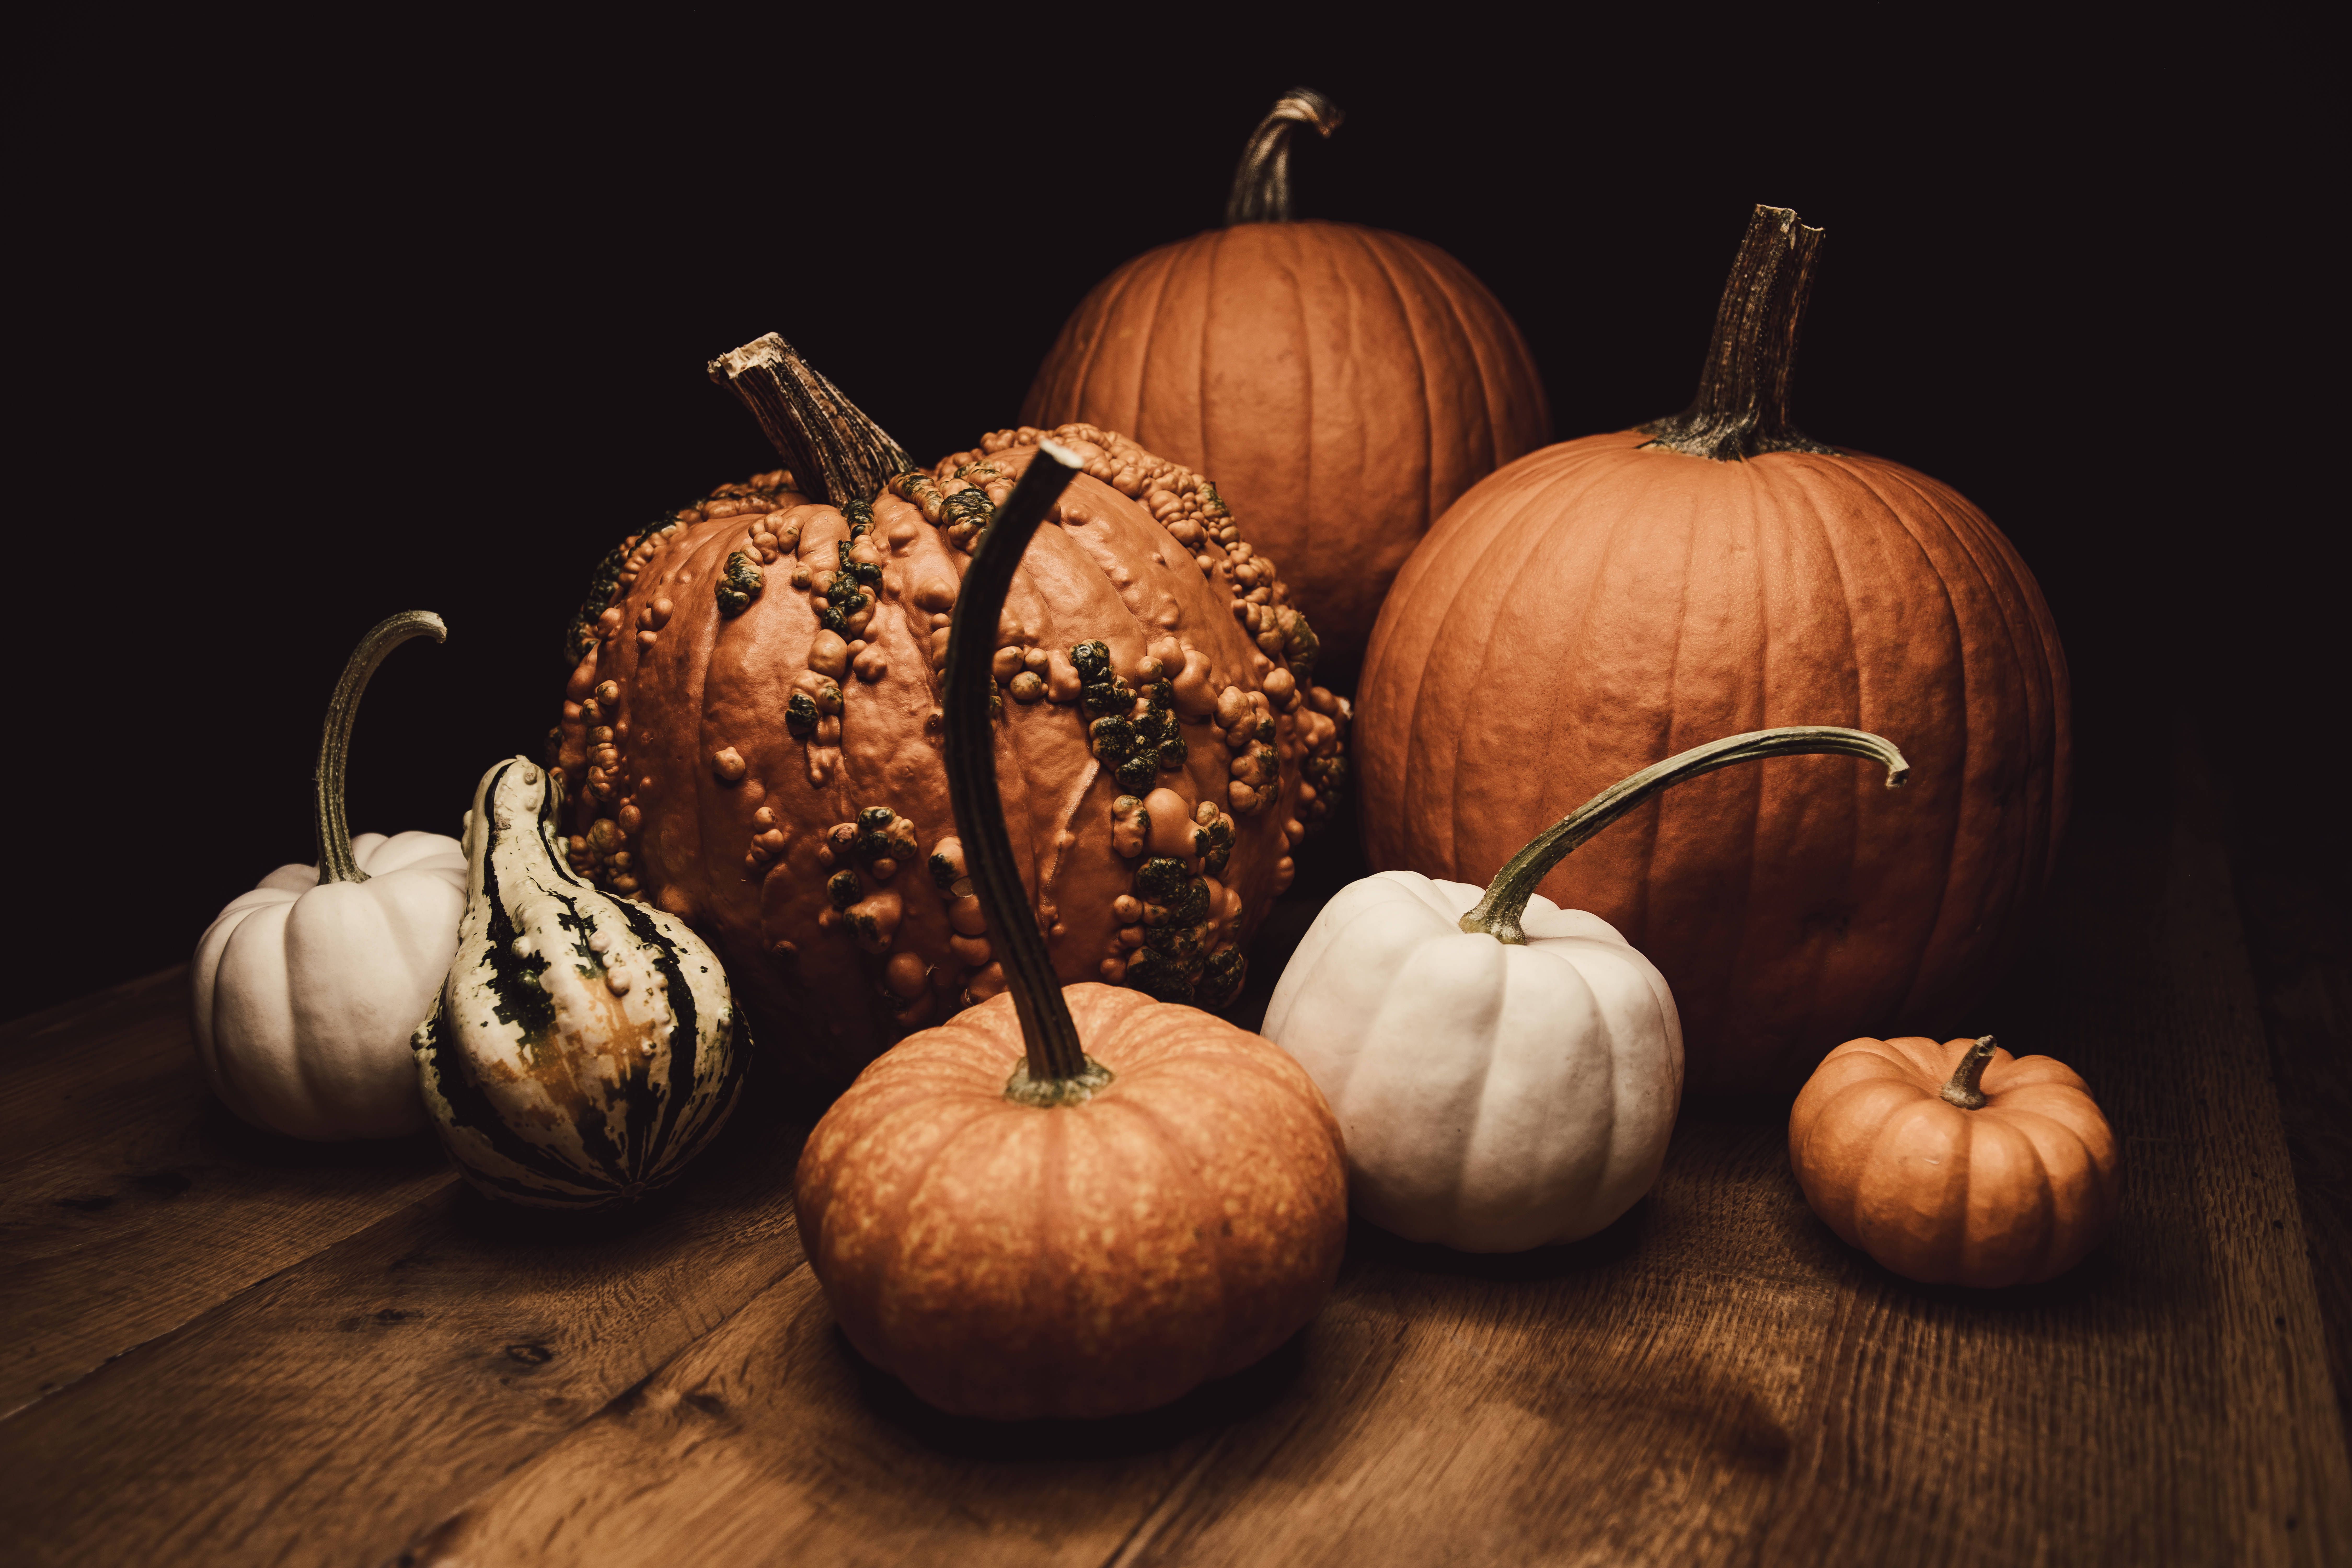 A group of different sized and shaped pumpkins - October, pumpkin, Thanksgiving